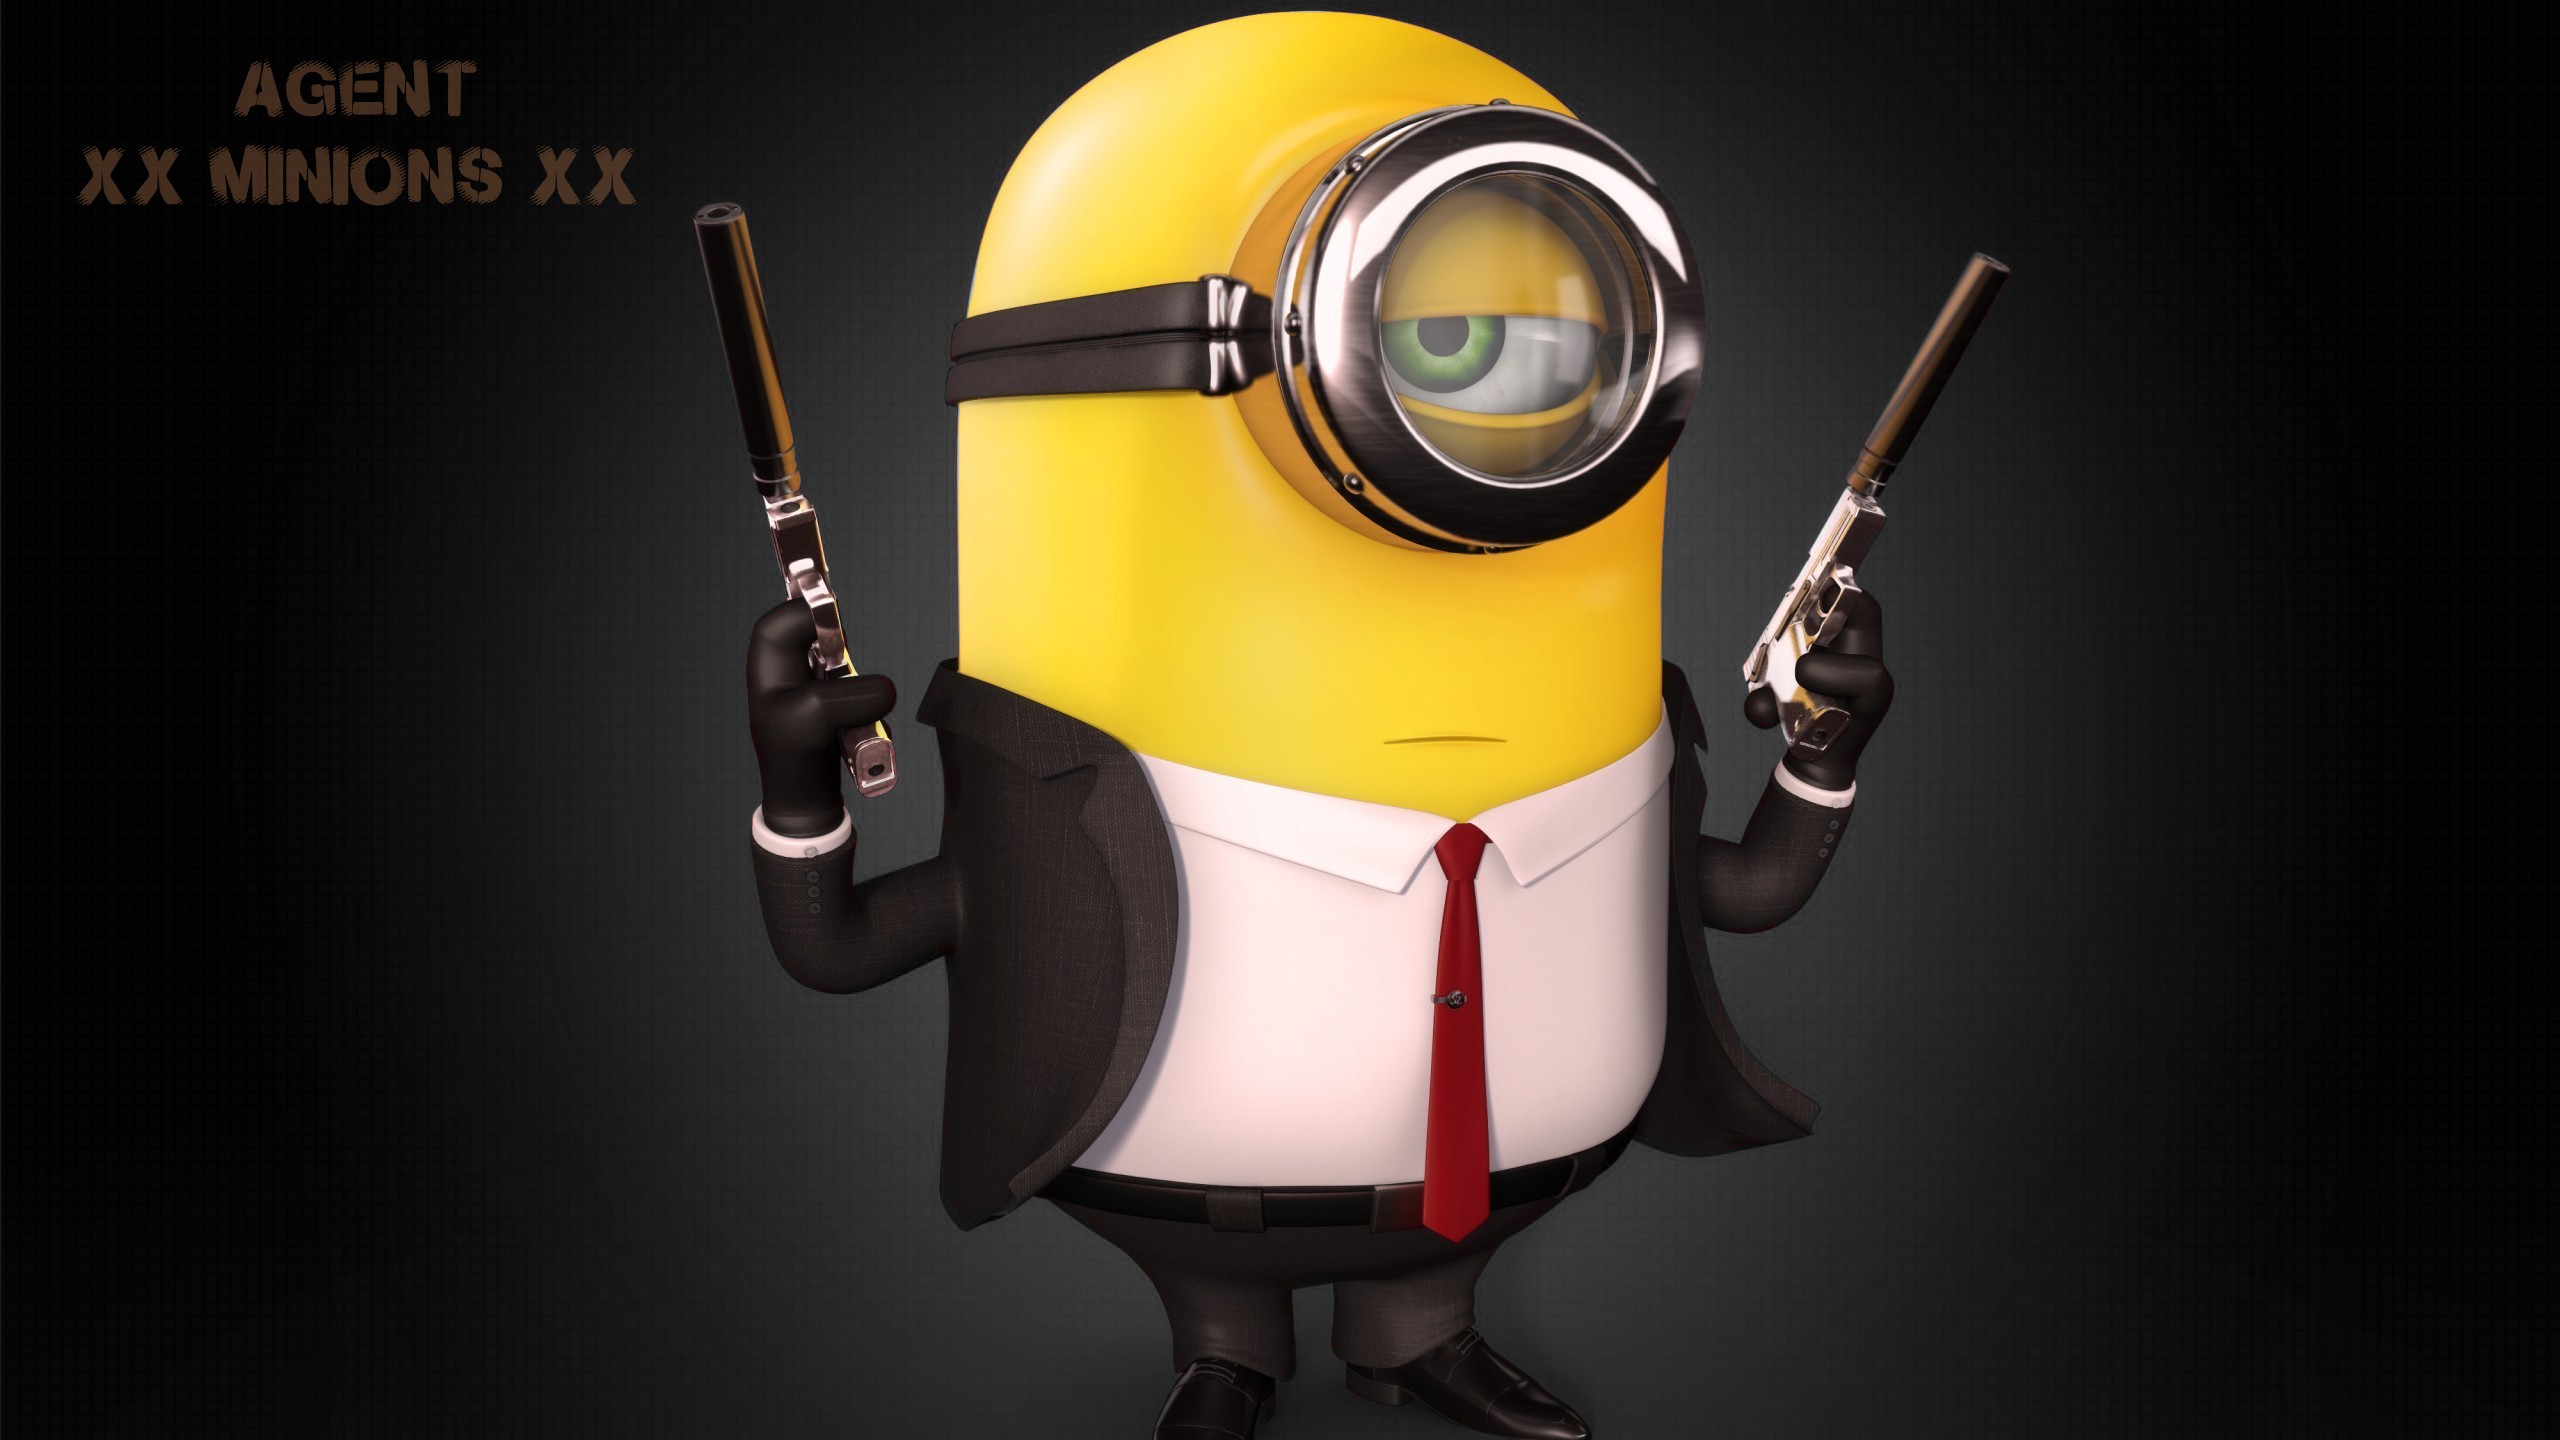 Minions Detectives Crossover Hitman Absolution Tie Red 2560x1440